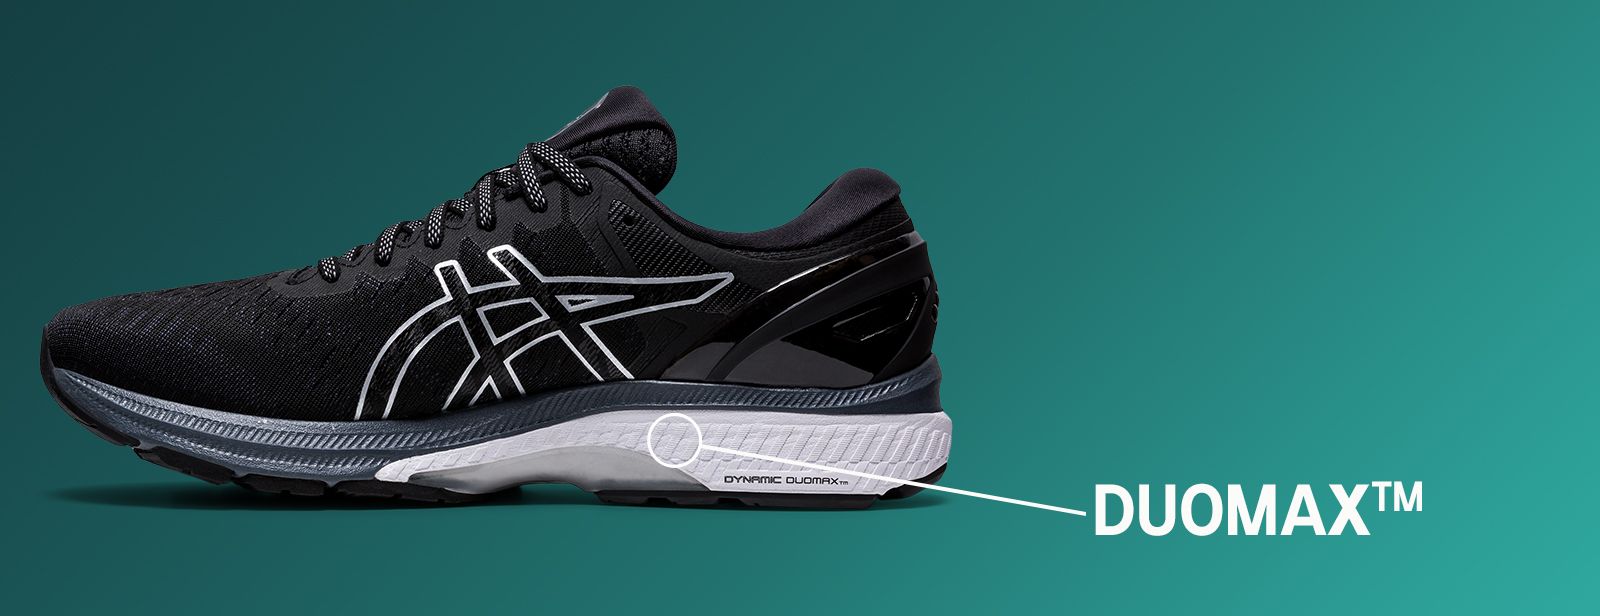 chaussures asics duomax femme